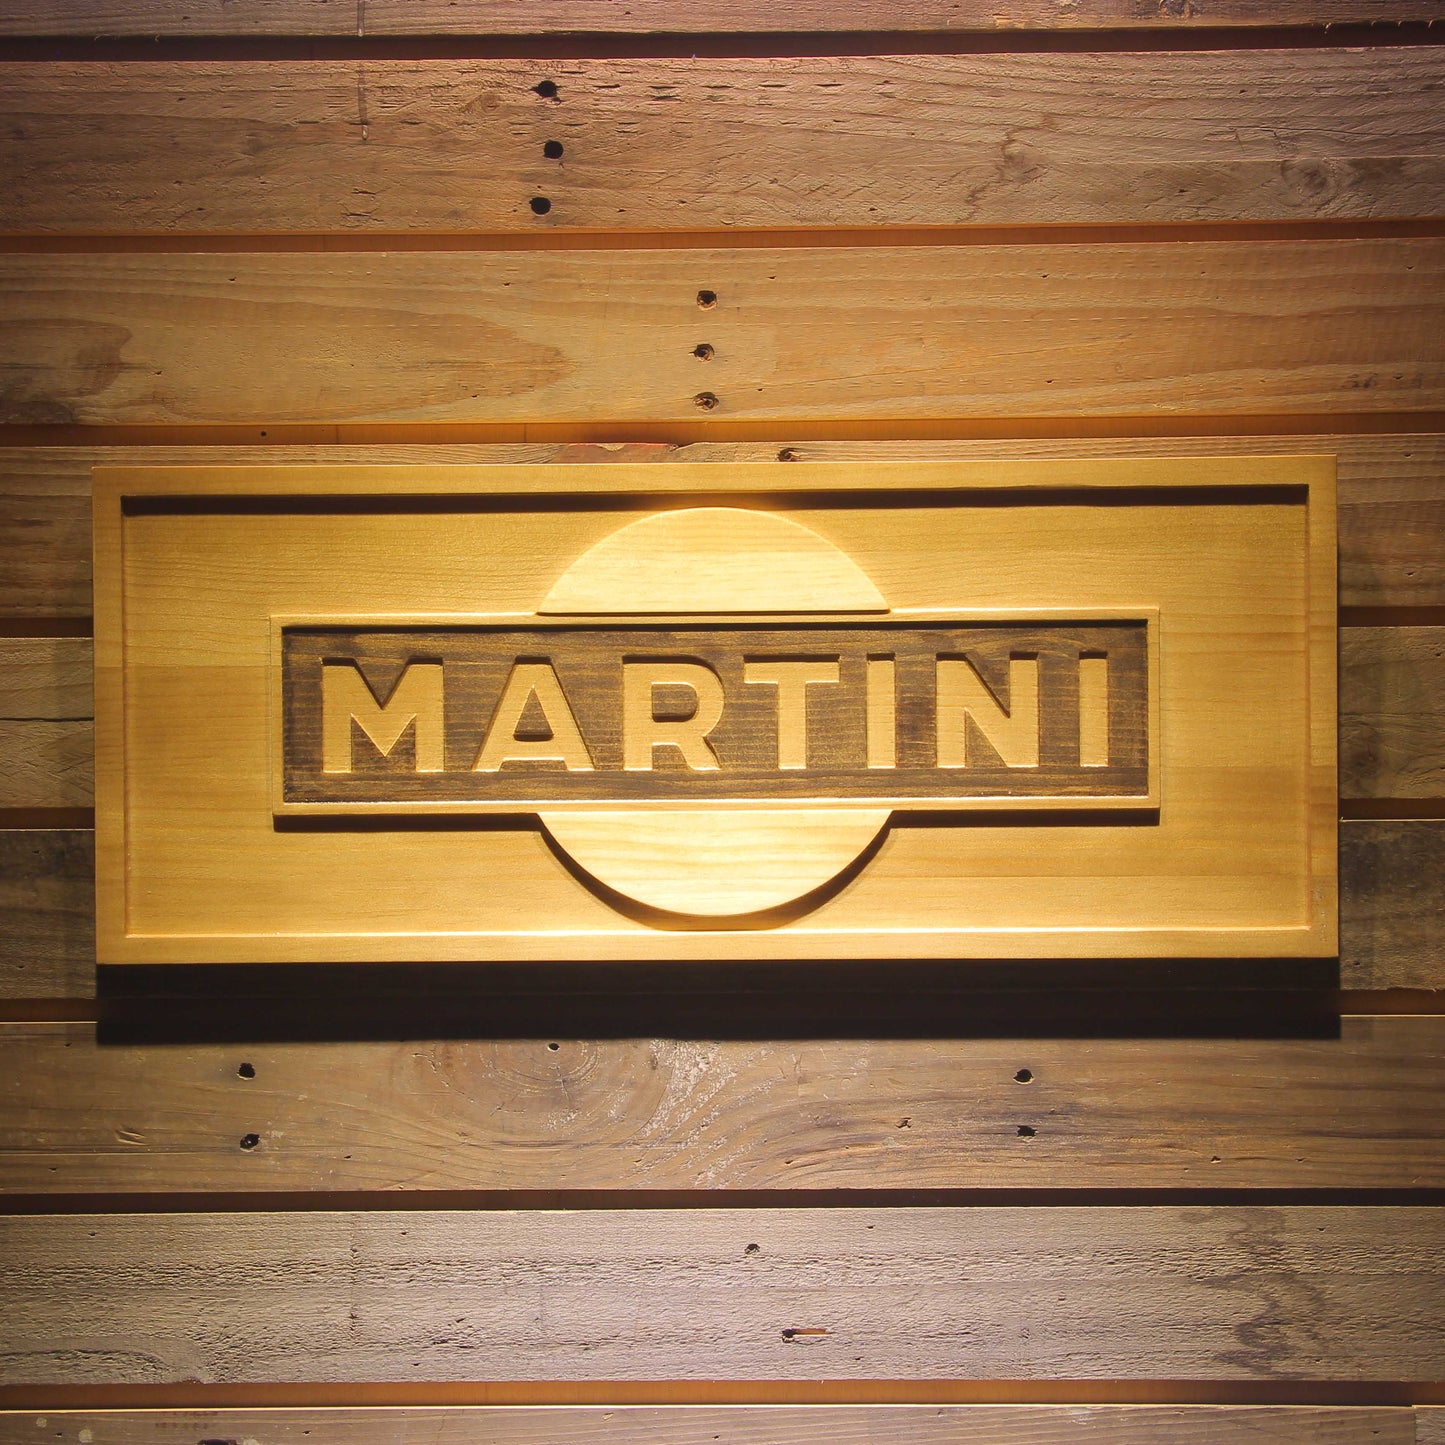 Martini  3D Wooden Bar Signs by Woody Signs Co. - Handmade Crafted Unique Wooden Creative